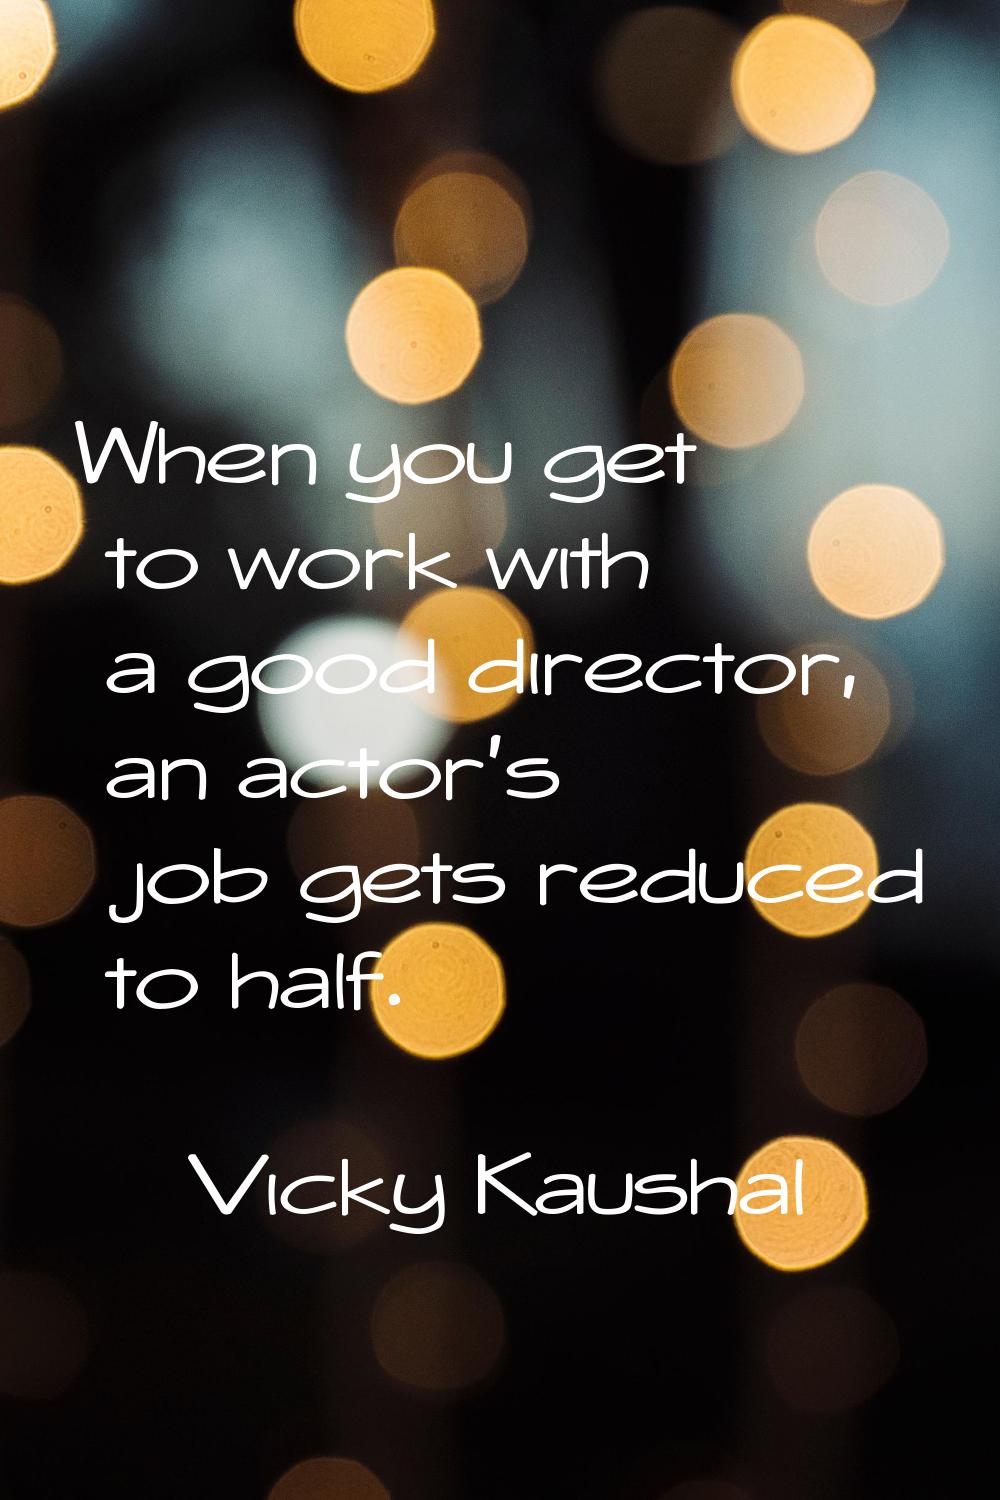 When you get to work with a good director, an actor's job gets reduced to half.